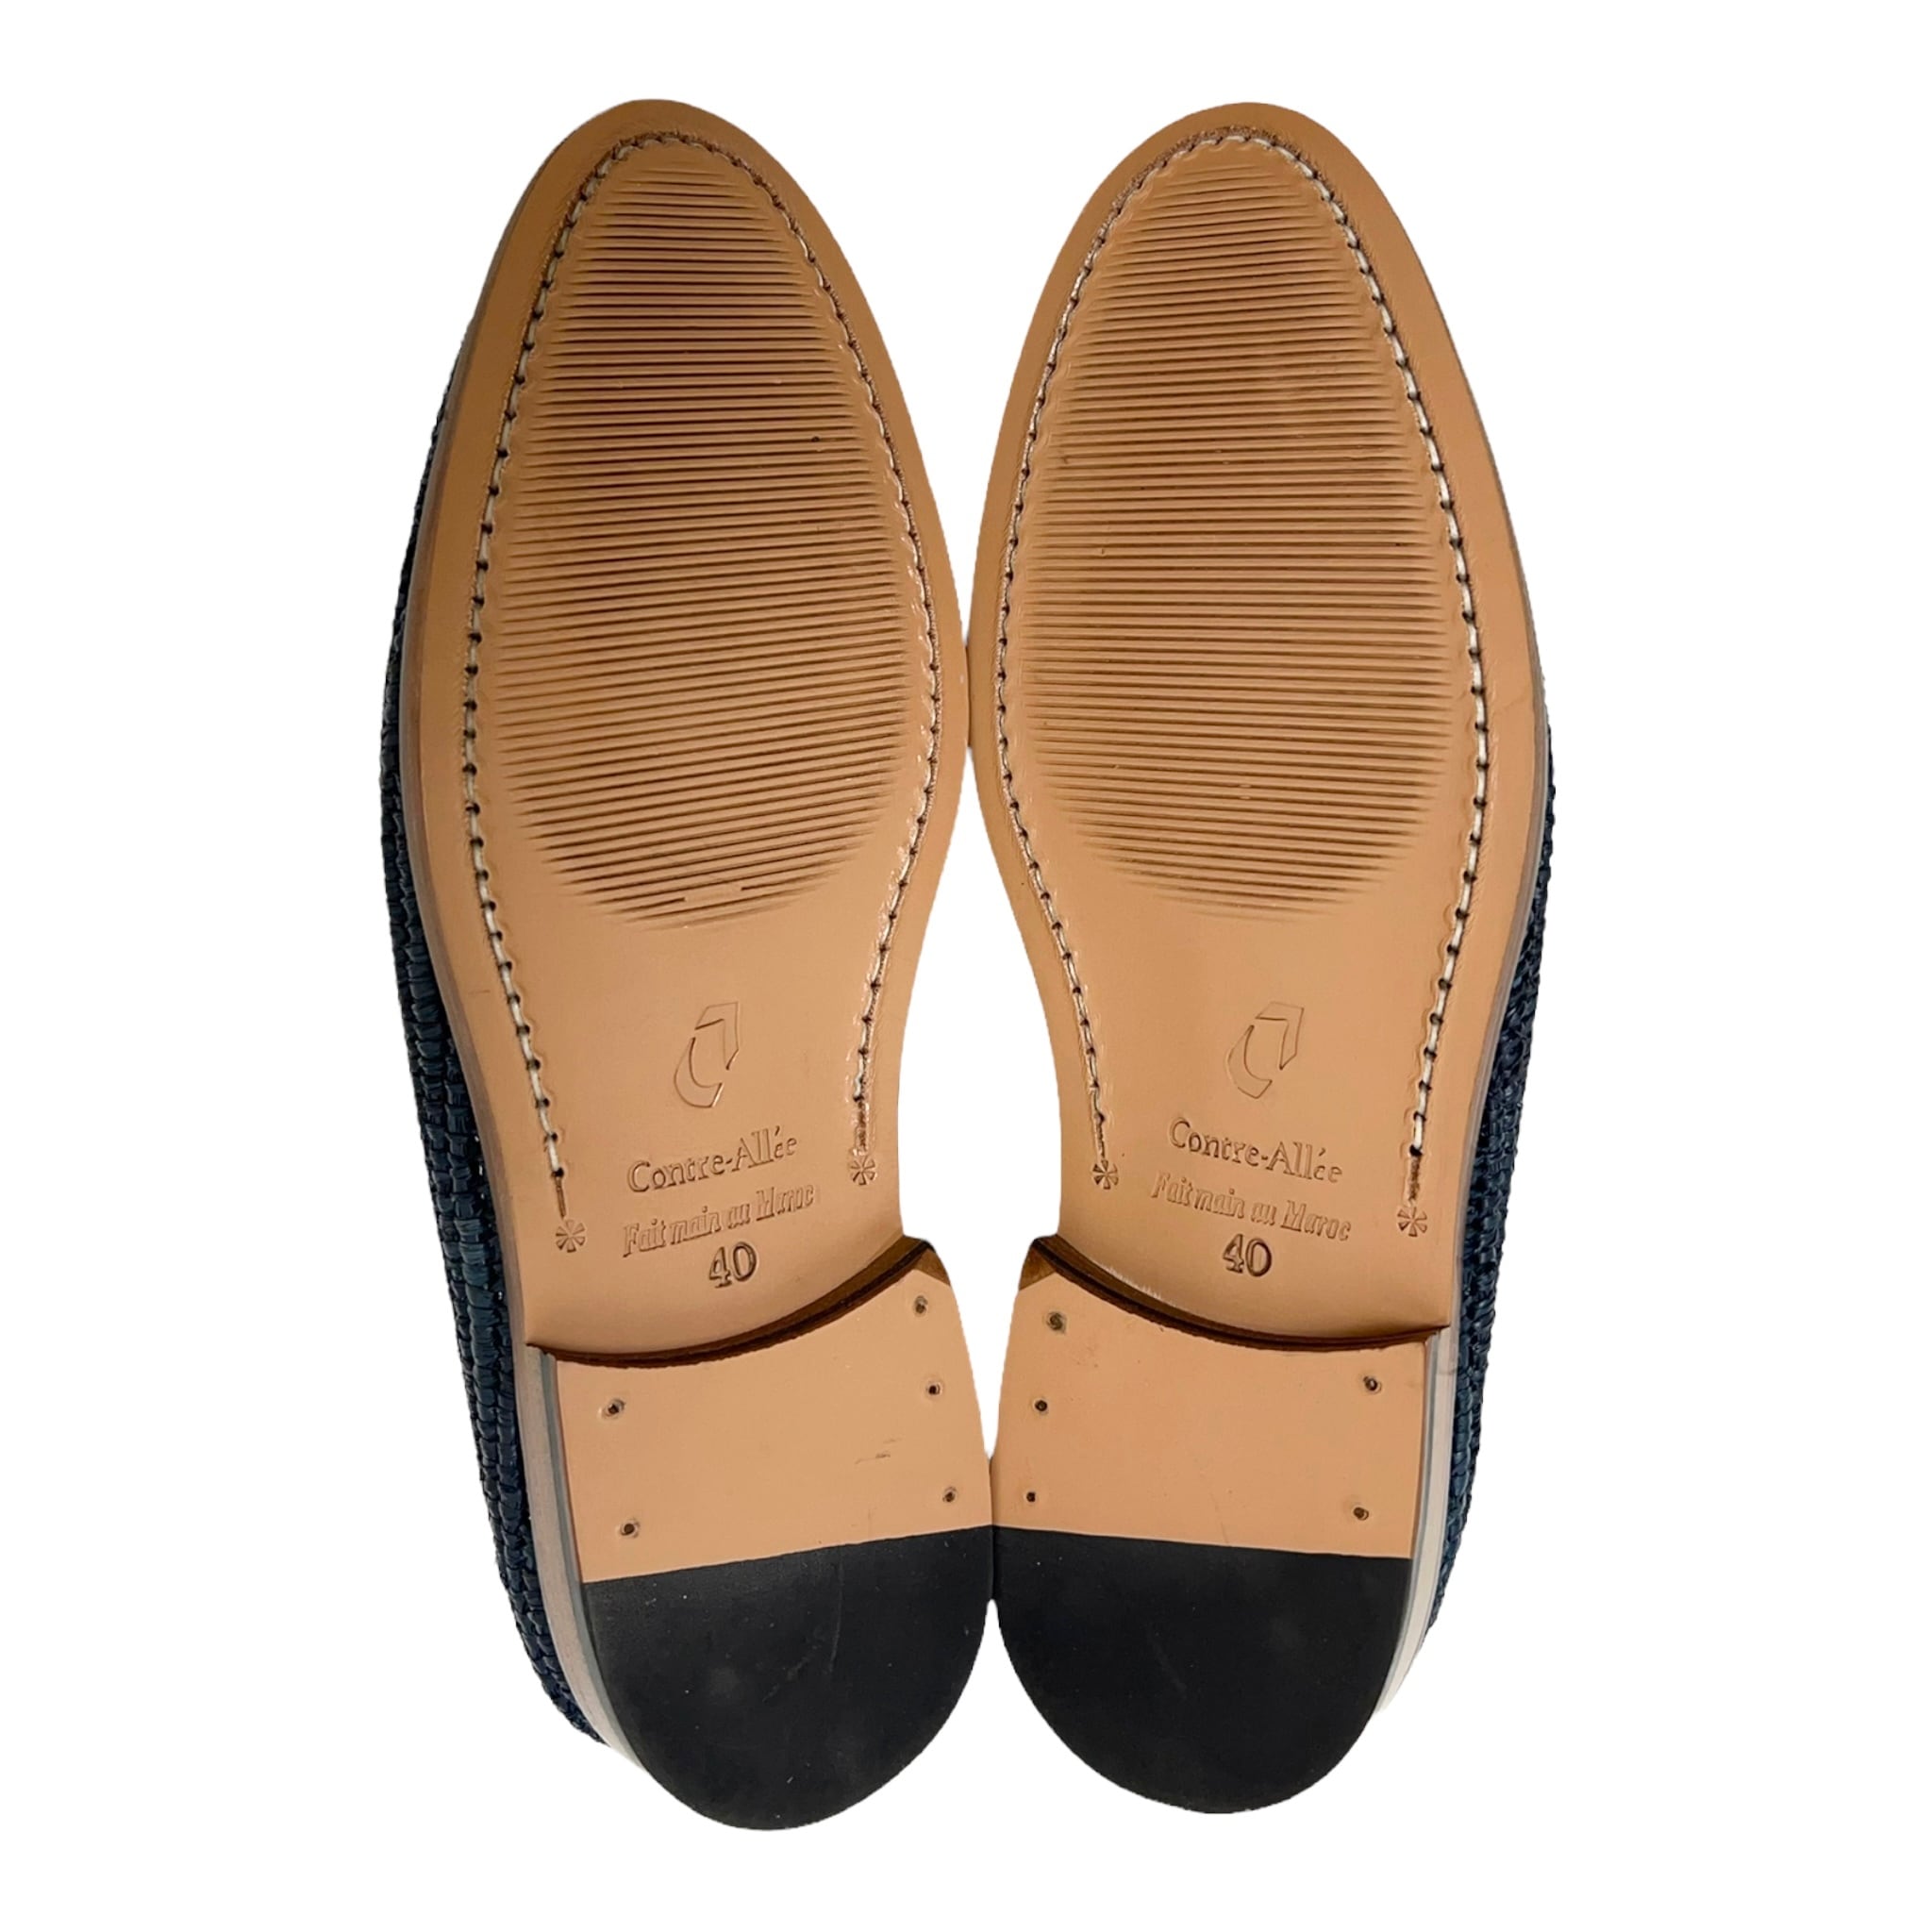 Contre Allée(コントレアリー) Tassel Loafers